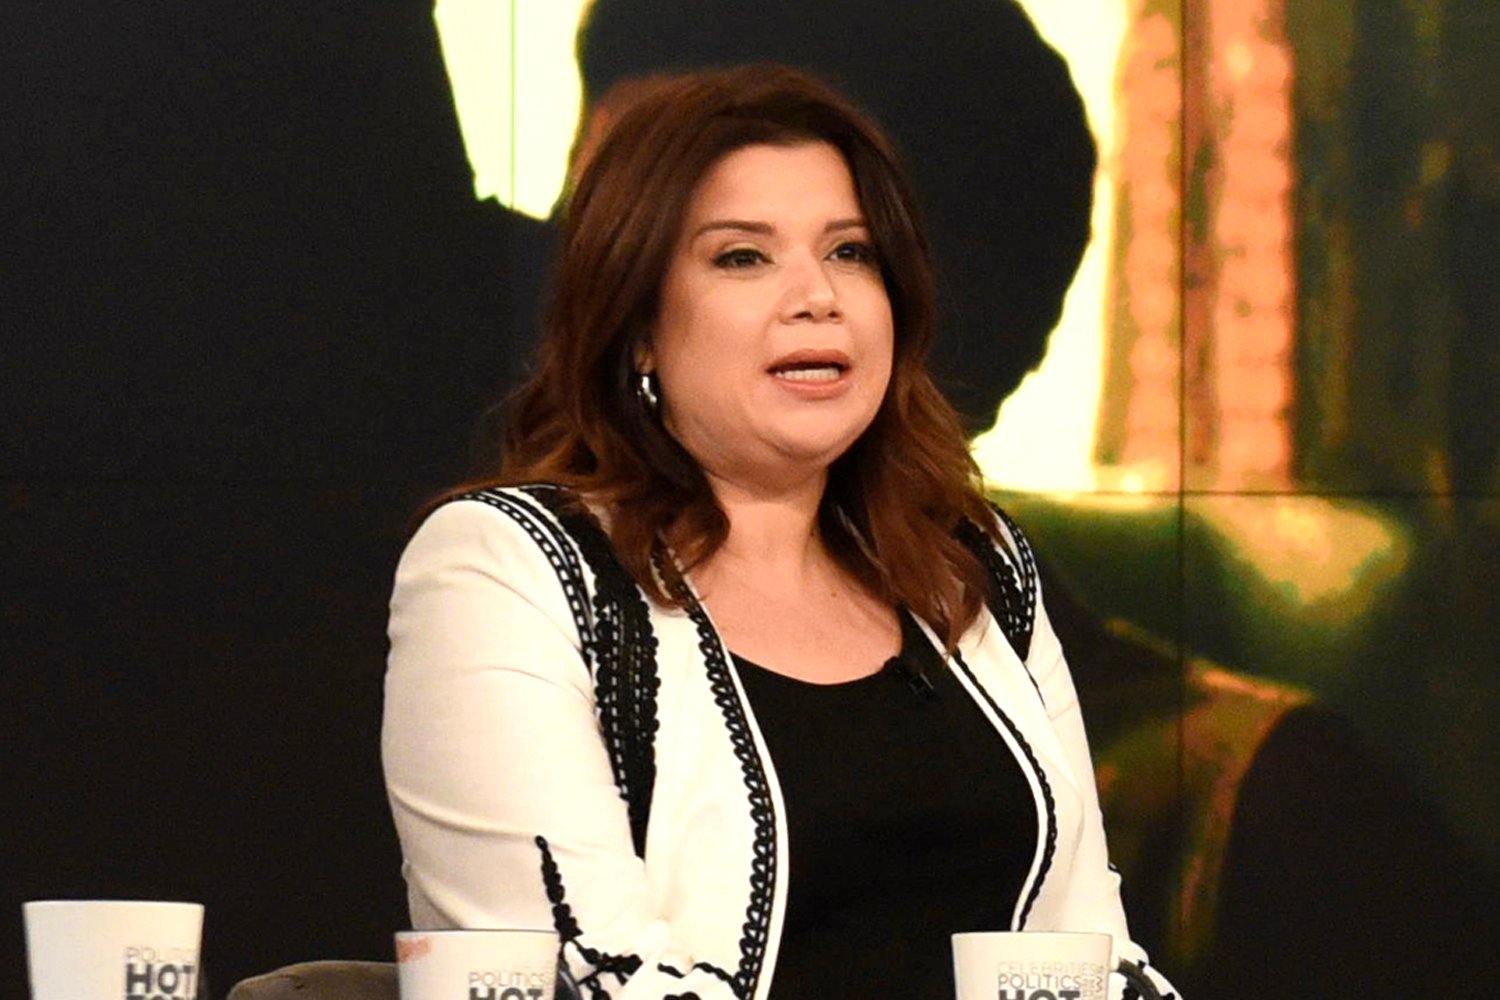 Ana Navarro wearing a black shirt and white jacket during an episode of 'The View'